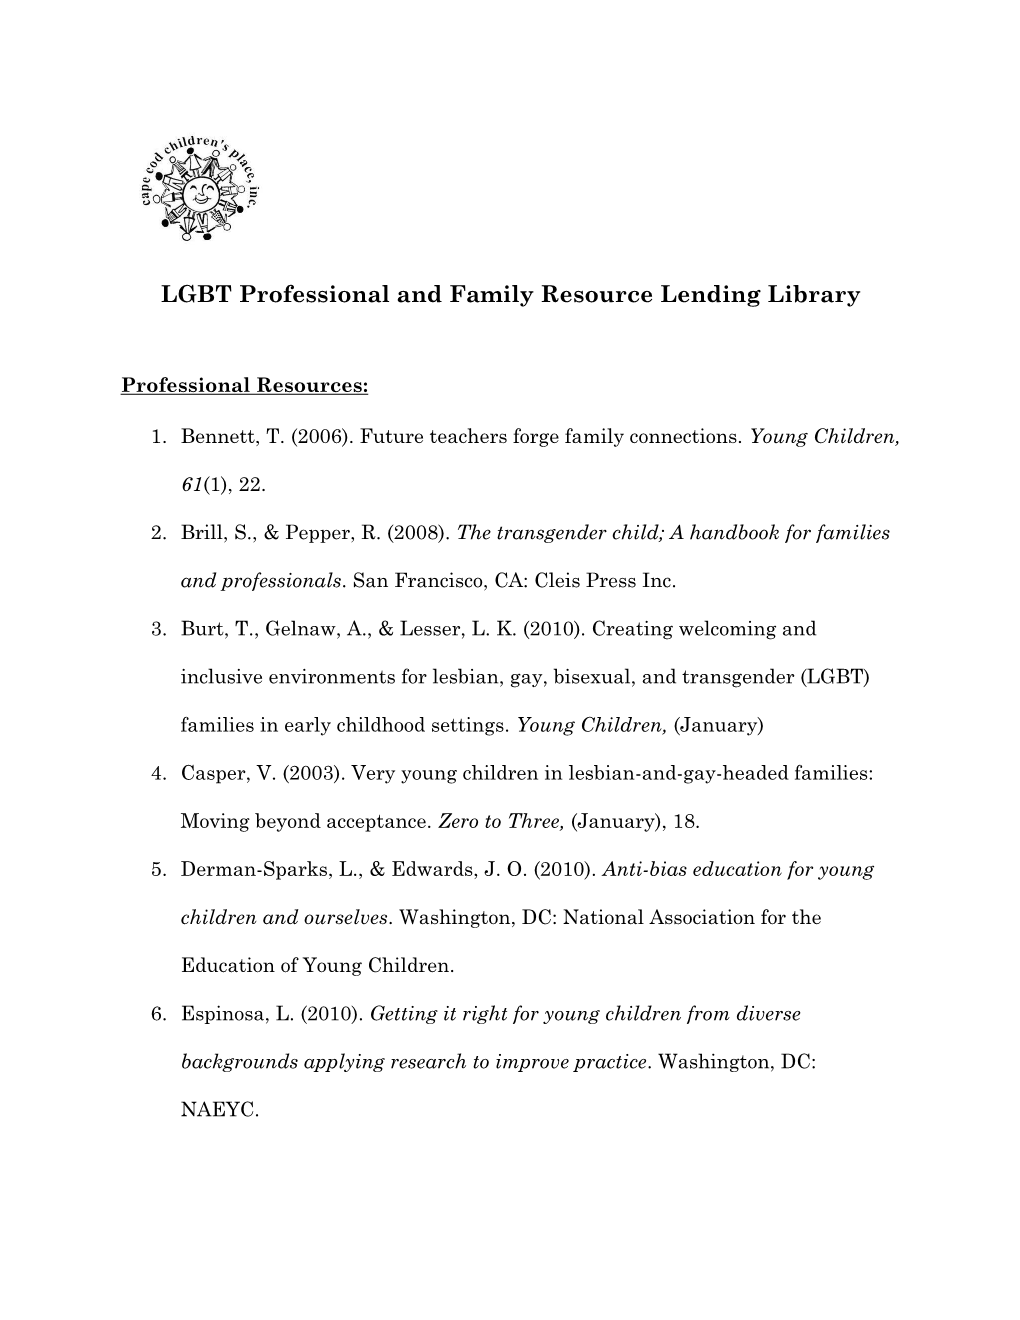 LGBT Professional and Family Resource Lending Library